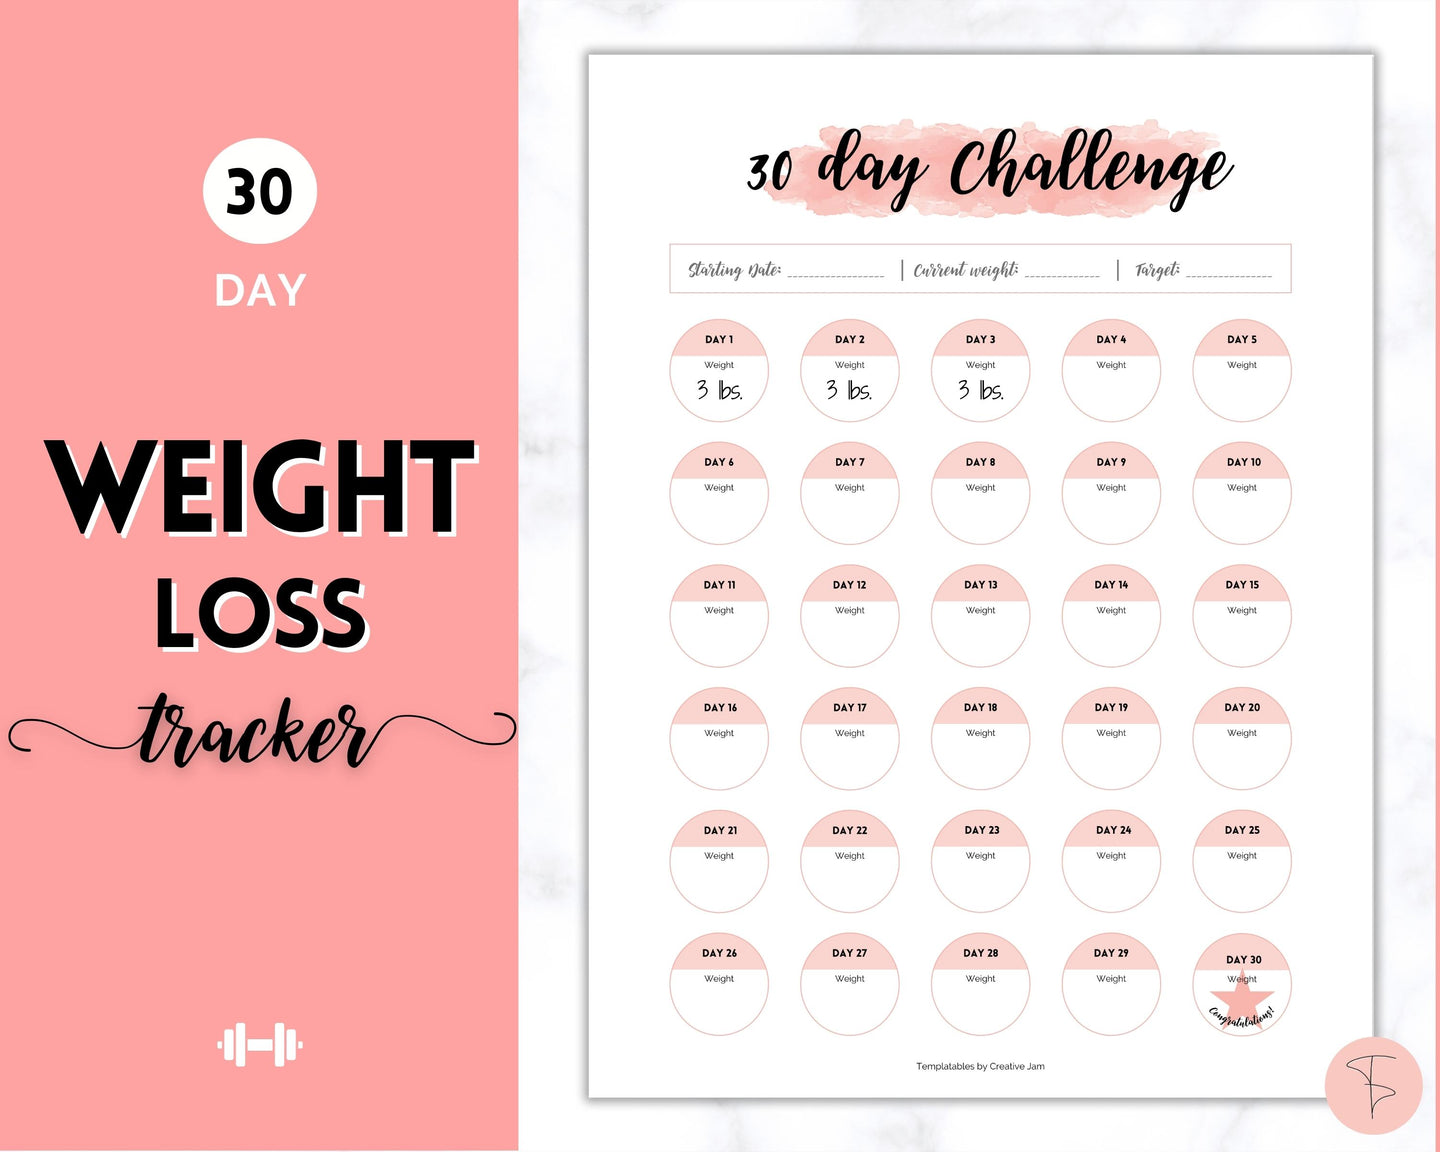 30 day Weight Loss Tracker & Monthly Challenge | Weight Loss Chart, Pounds Lost Fitness Tracker | Pink Swash